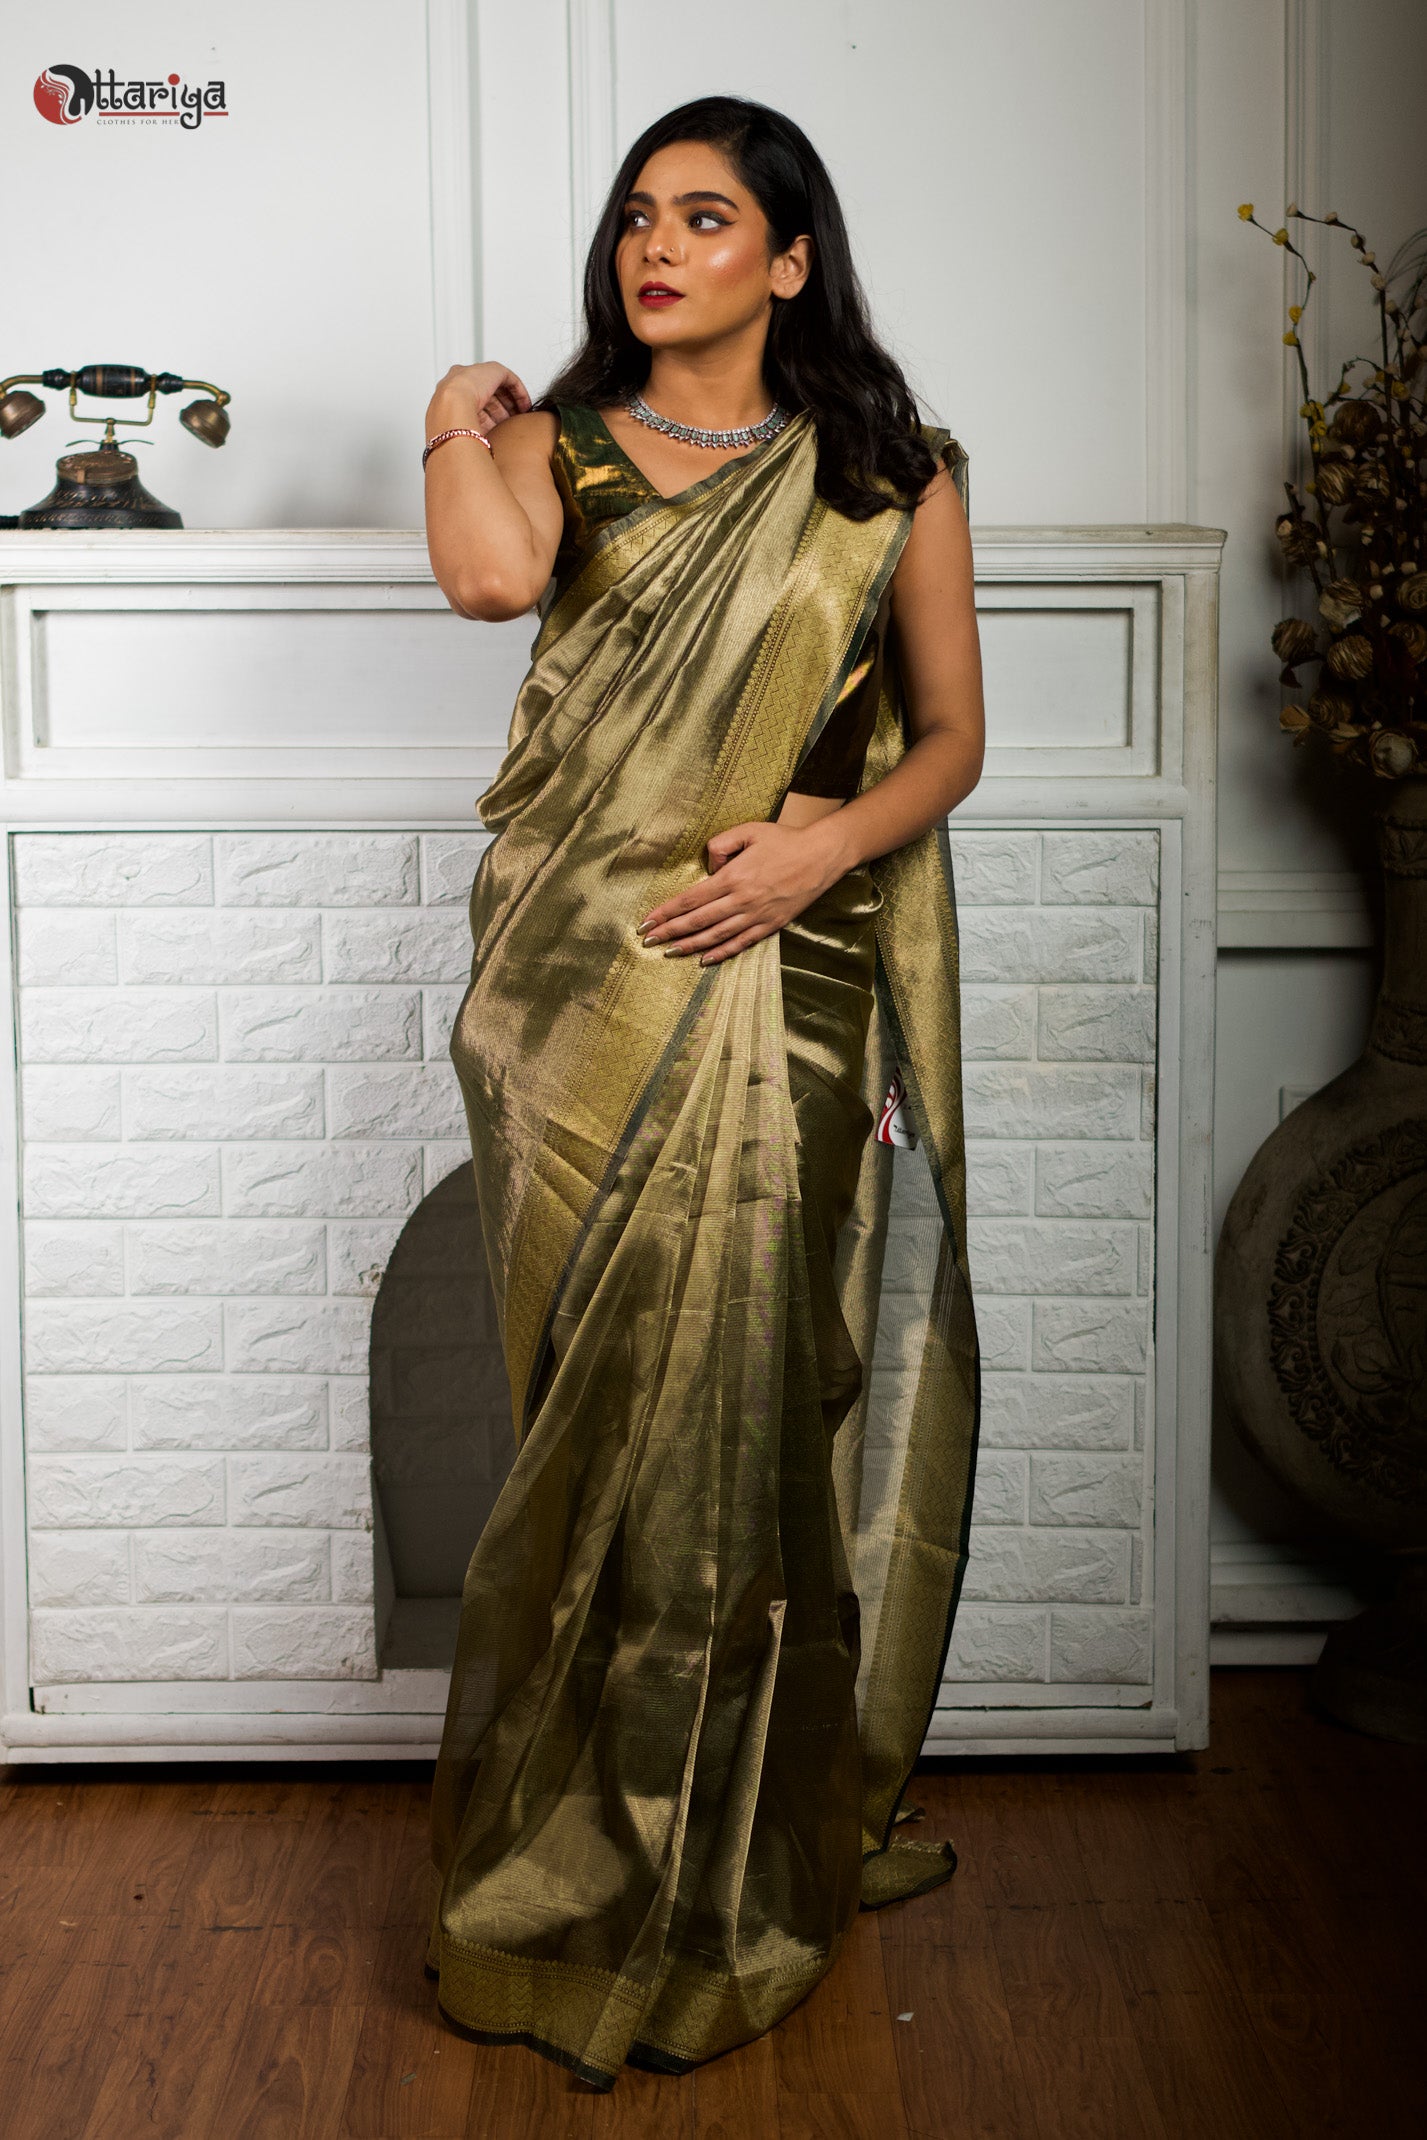 DateTheRamp - Featured here: Vartika in a radiant silver tissue saree with  statement royal-blue raw silk blouse, from the DateTheRamp saree collection.  Adorned with jewelry from our jewelry collection 🤩 . Celeb